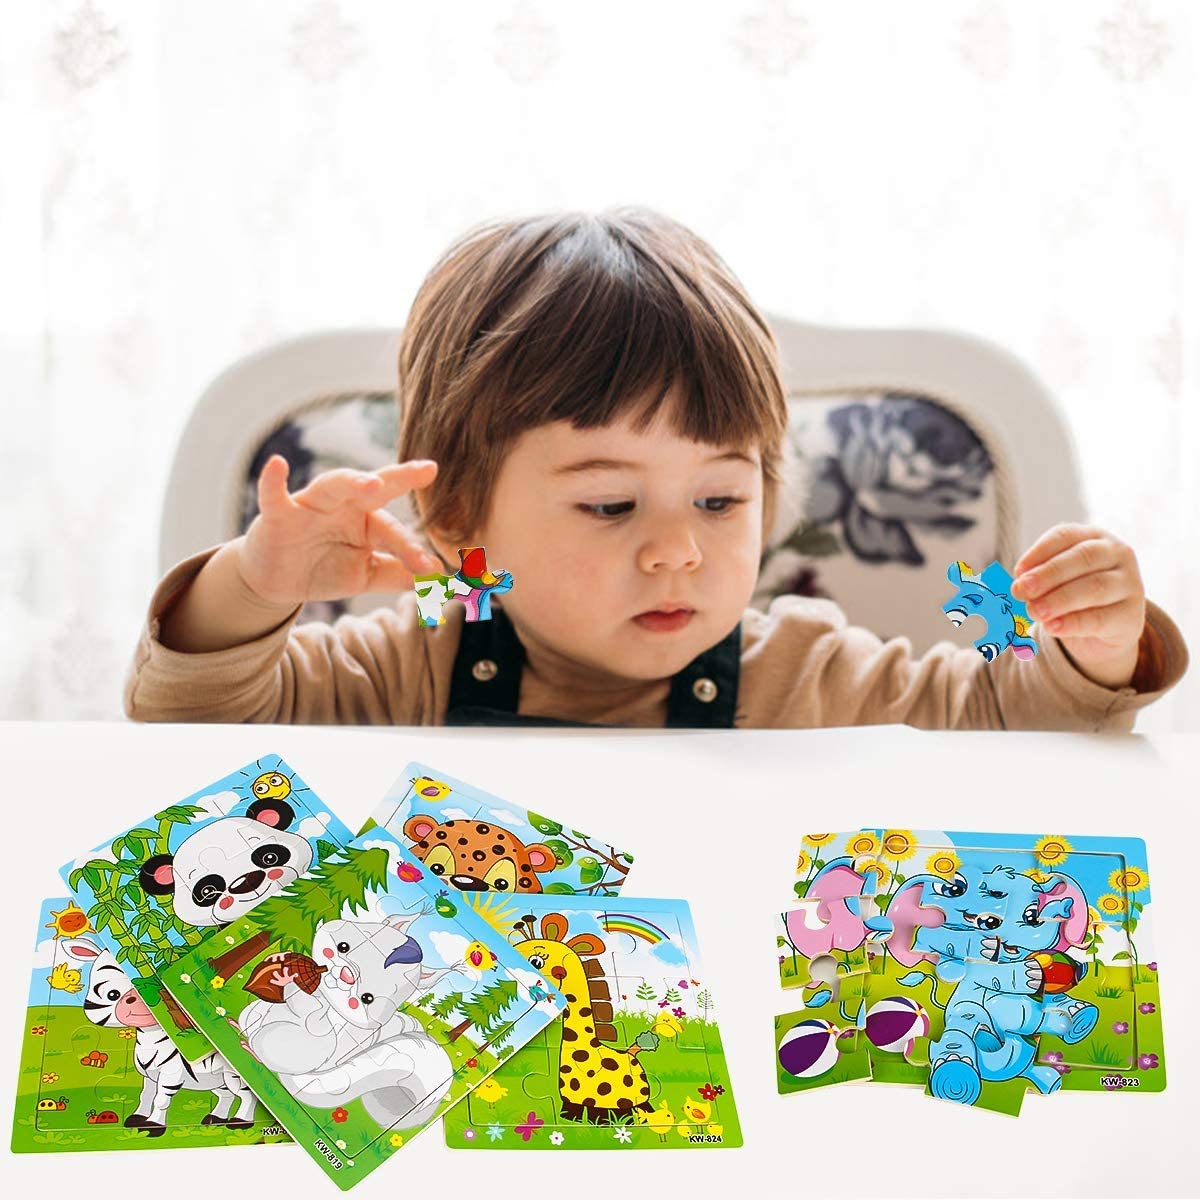 EverDirect Wooden Jigsaw Puzzles for Kids Ages 2-5 Toddler Puzzles 9 Pieces Preschool Educational Learning Toys Set Animals Puzzles for 2 3 4 Years Old Boys and Girls (4 Puzzles) - image 1 of 6